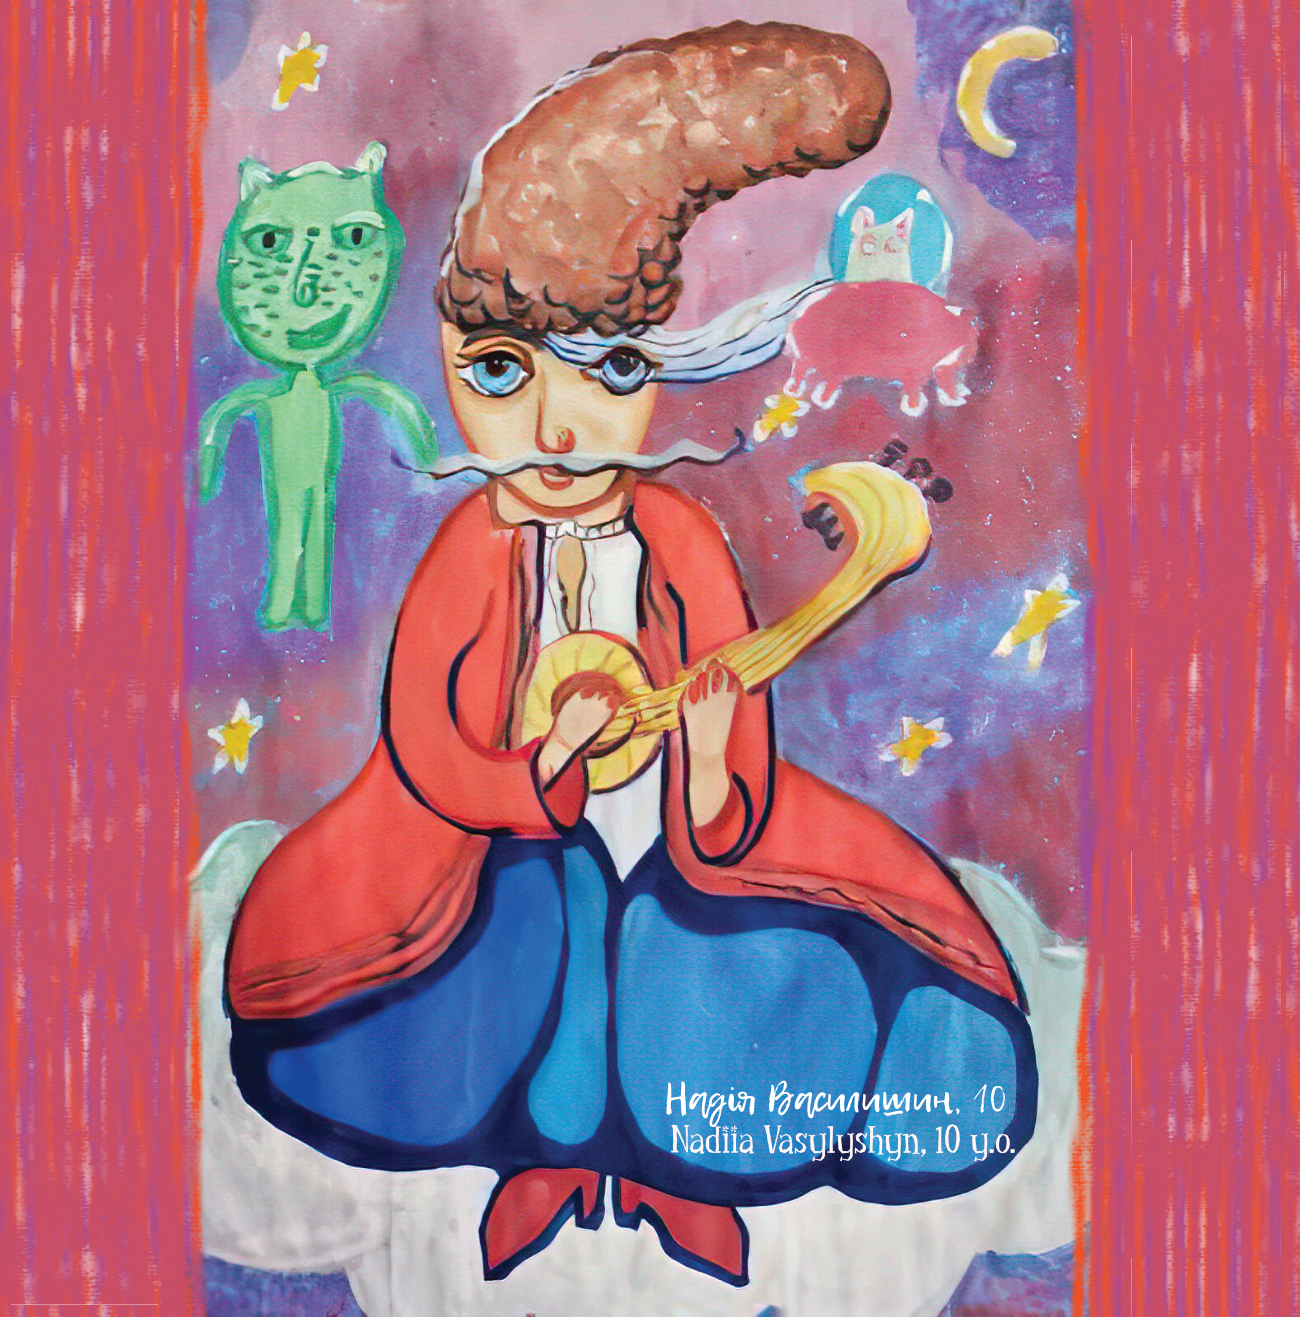 Bedtime stories for kids Ukrainian Space Hotel by Jade Maitre short stories for kids page 35